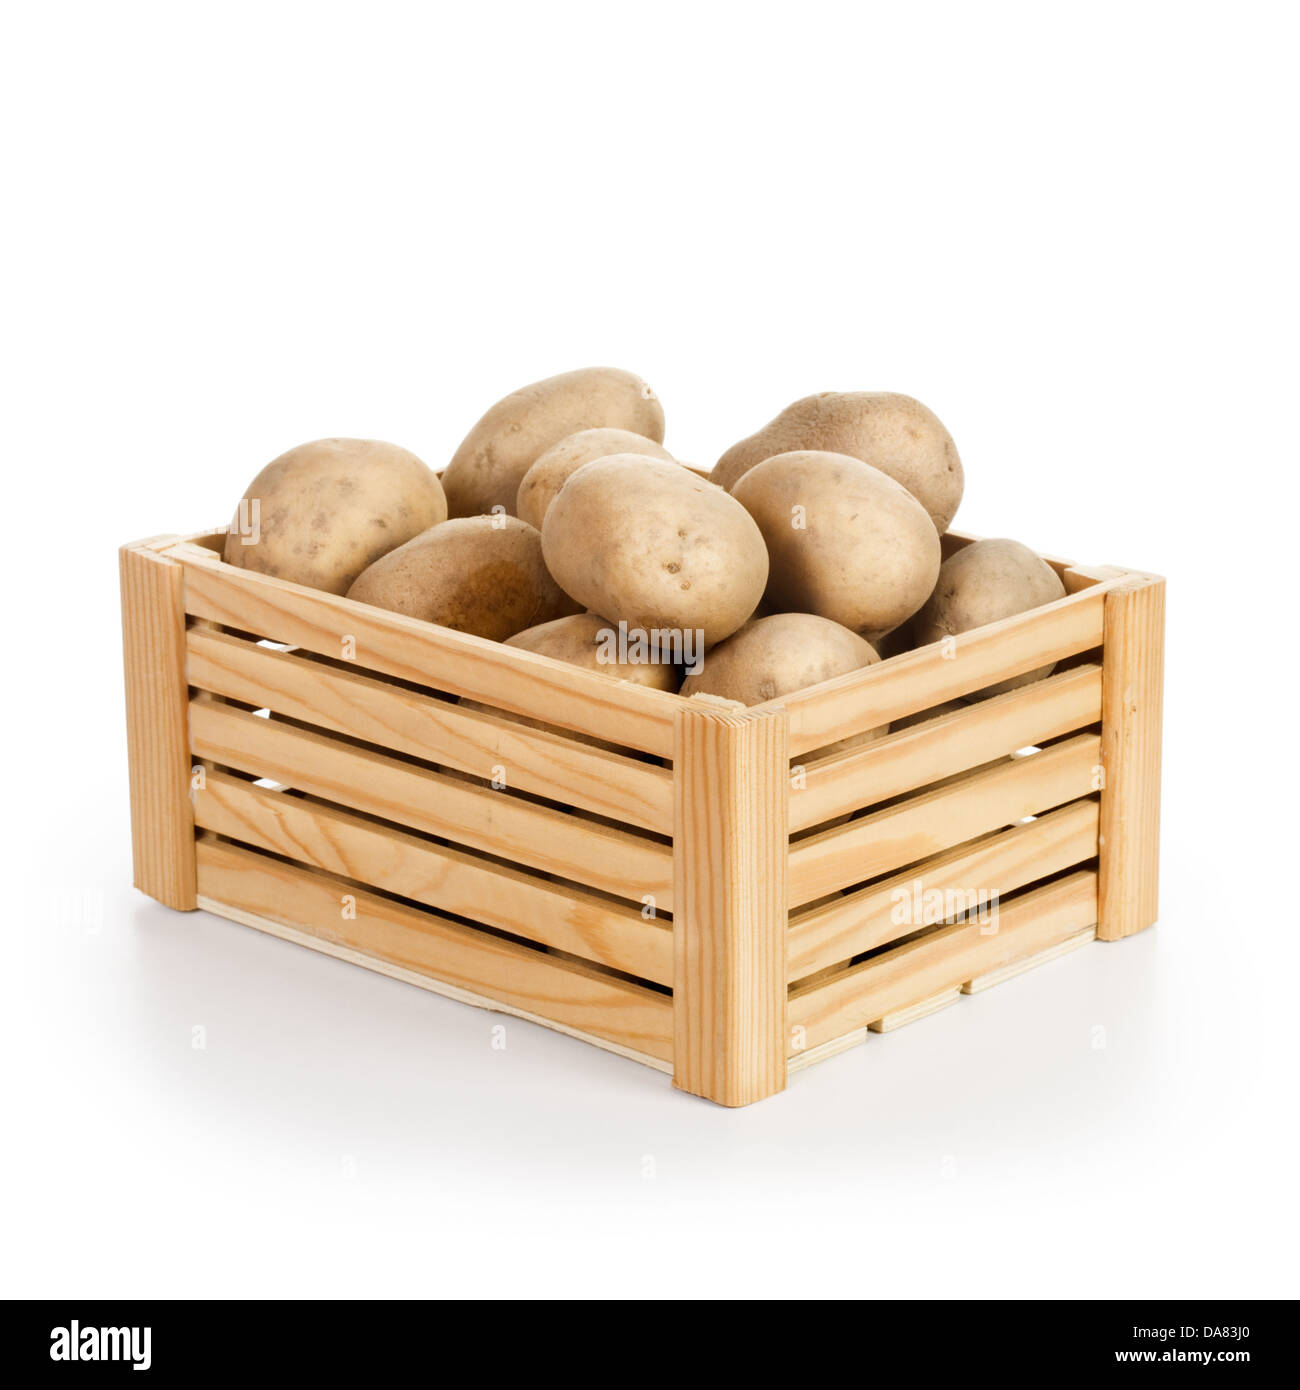 Download Crate Of Raw Potatoes Isolated On White Background Stock Photo Alamy Yellowimages Mockups